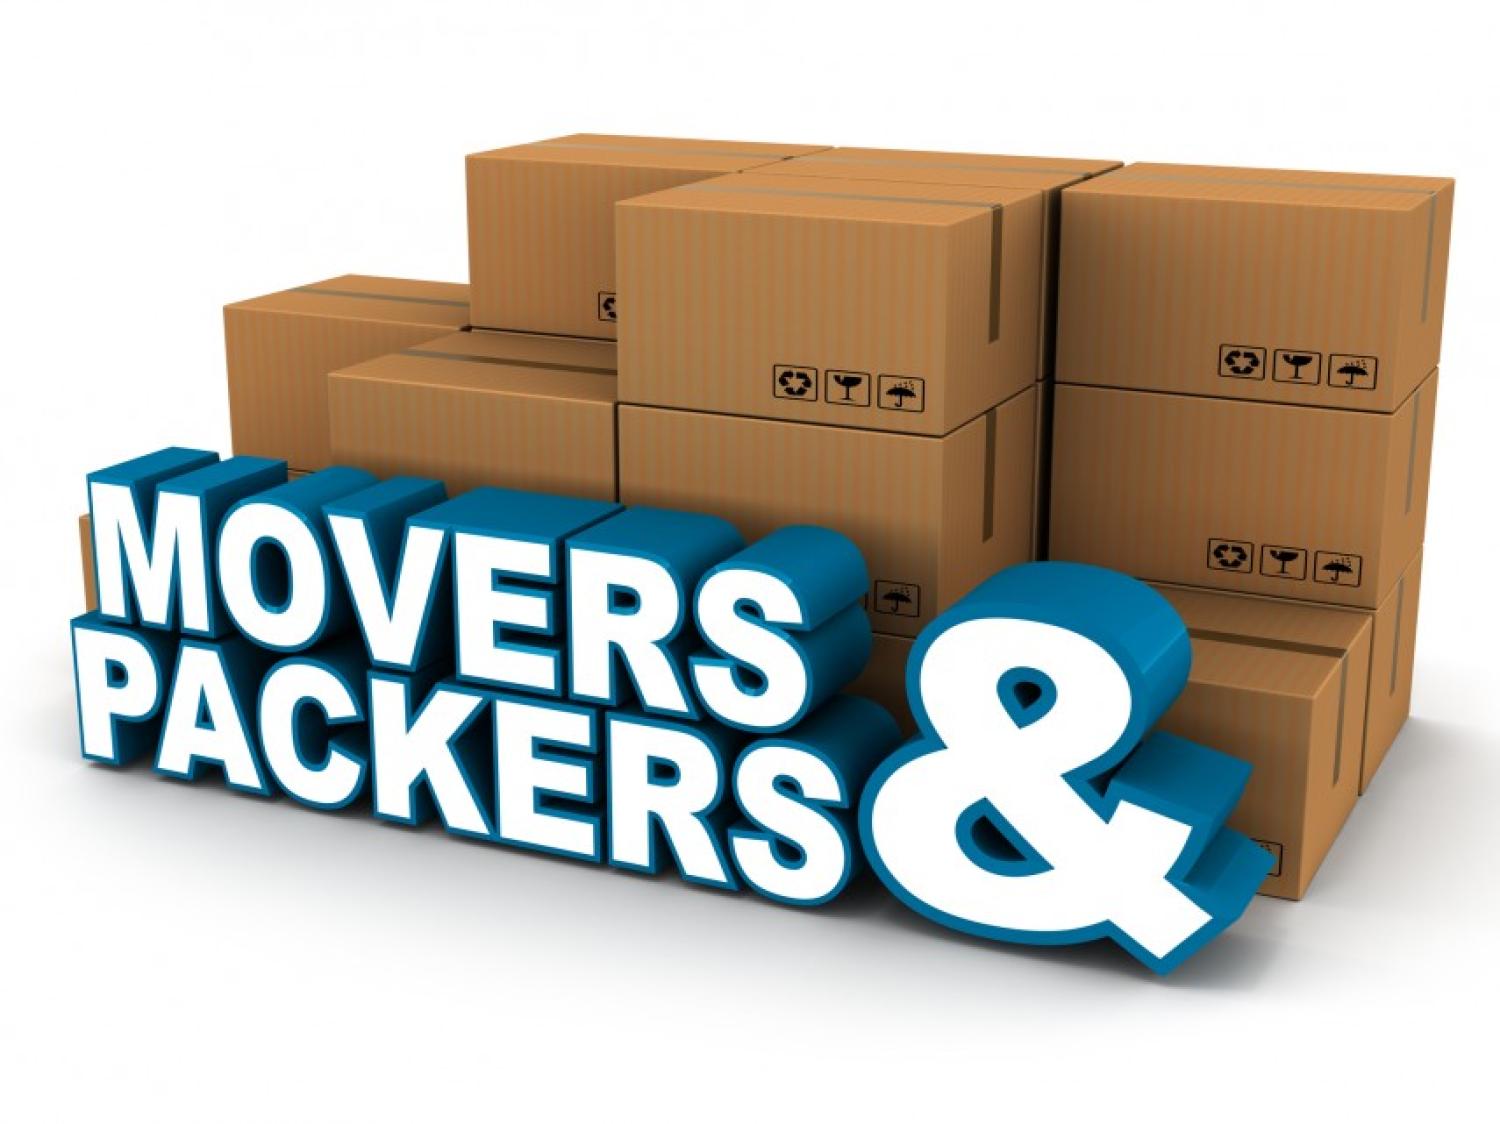 Removals And Movers Melbourne - Some Considerations